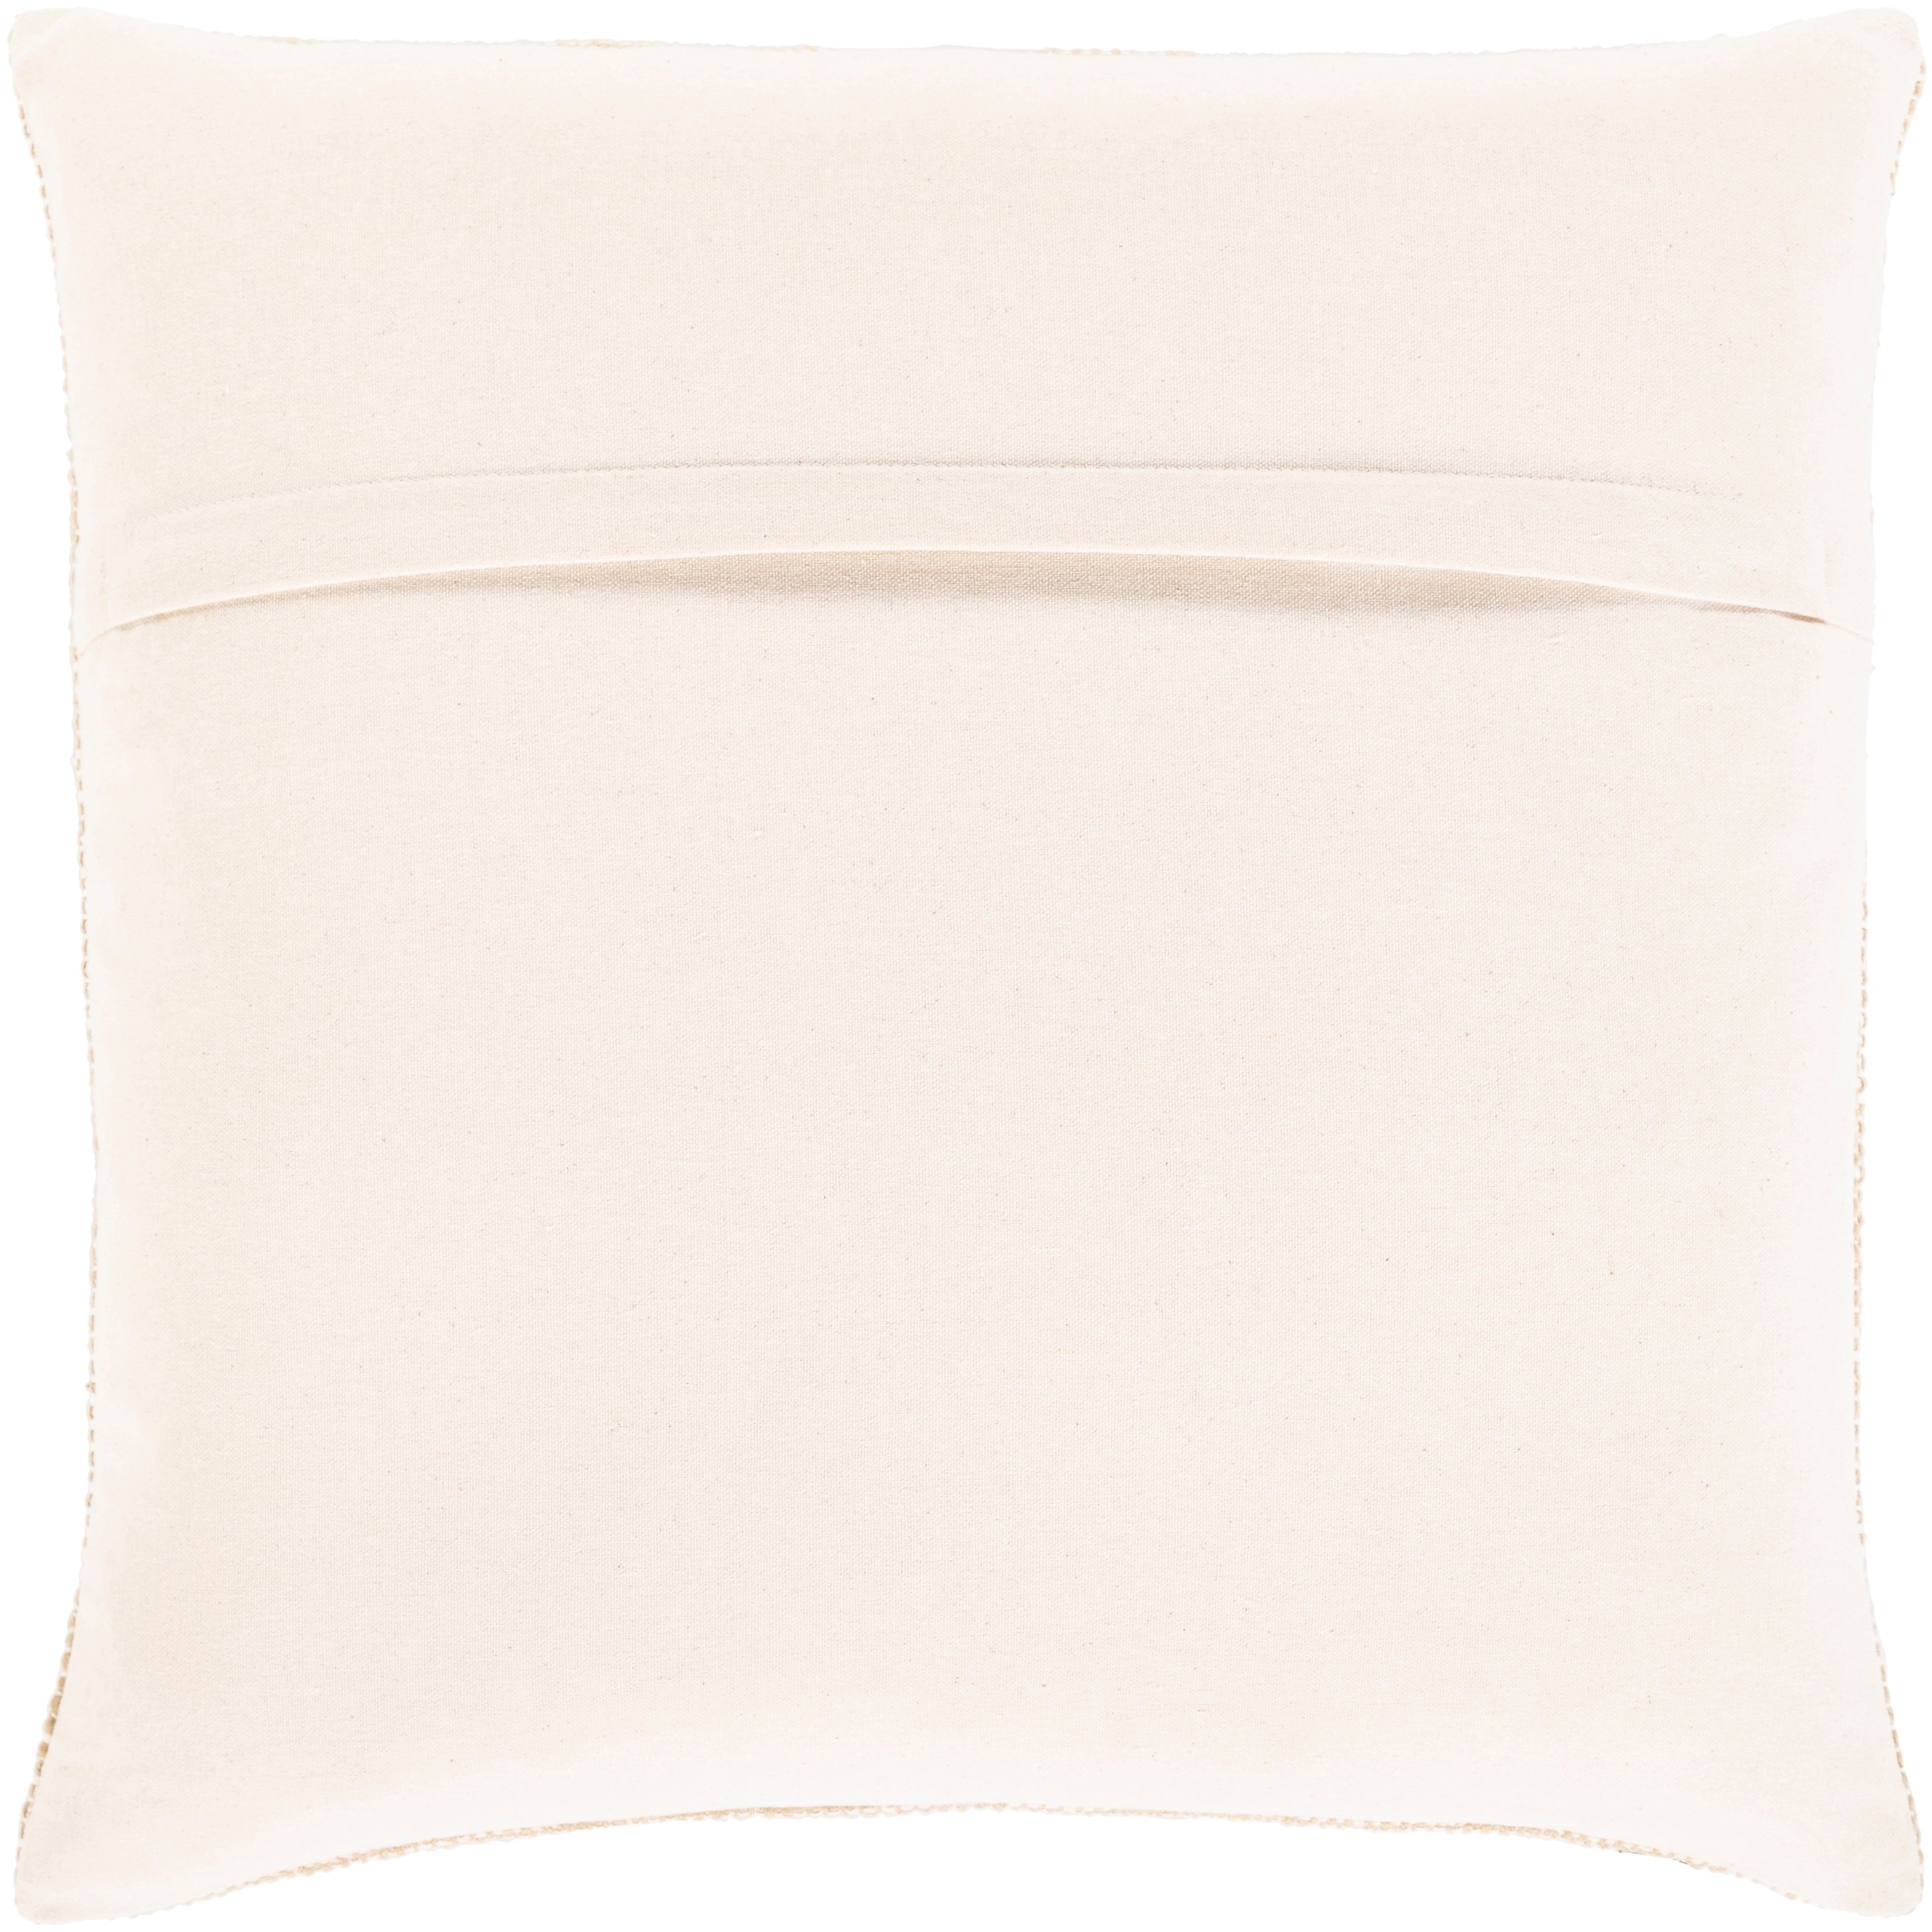 Pillow - Suri - 20"H x 20"W - Cover Only - Image 1